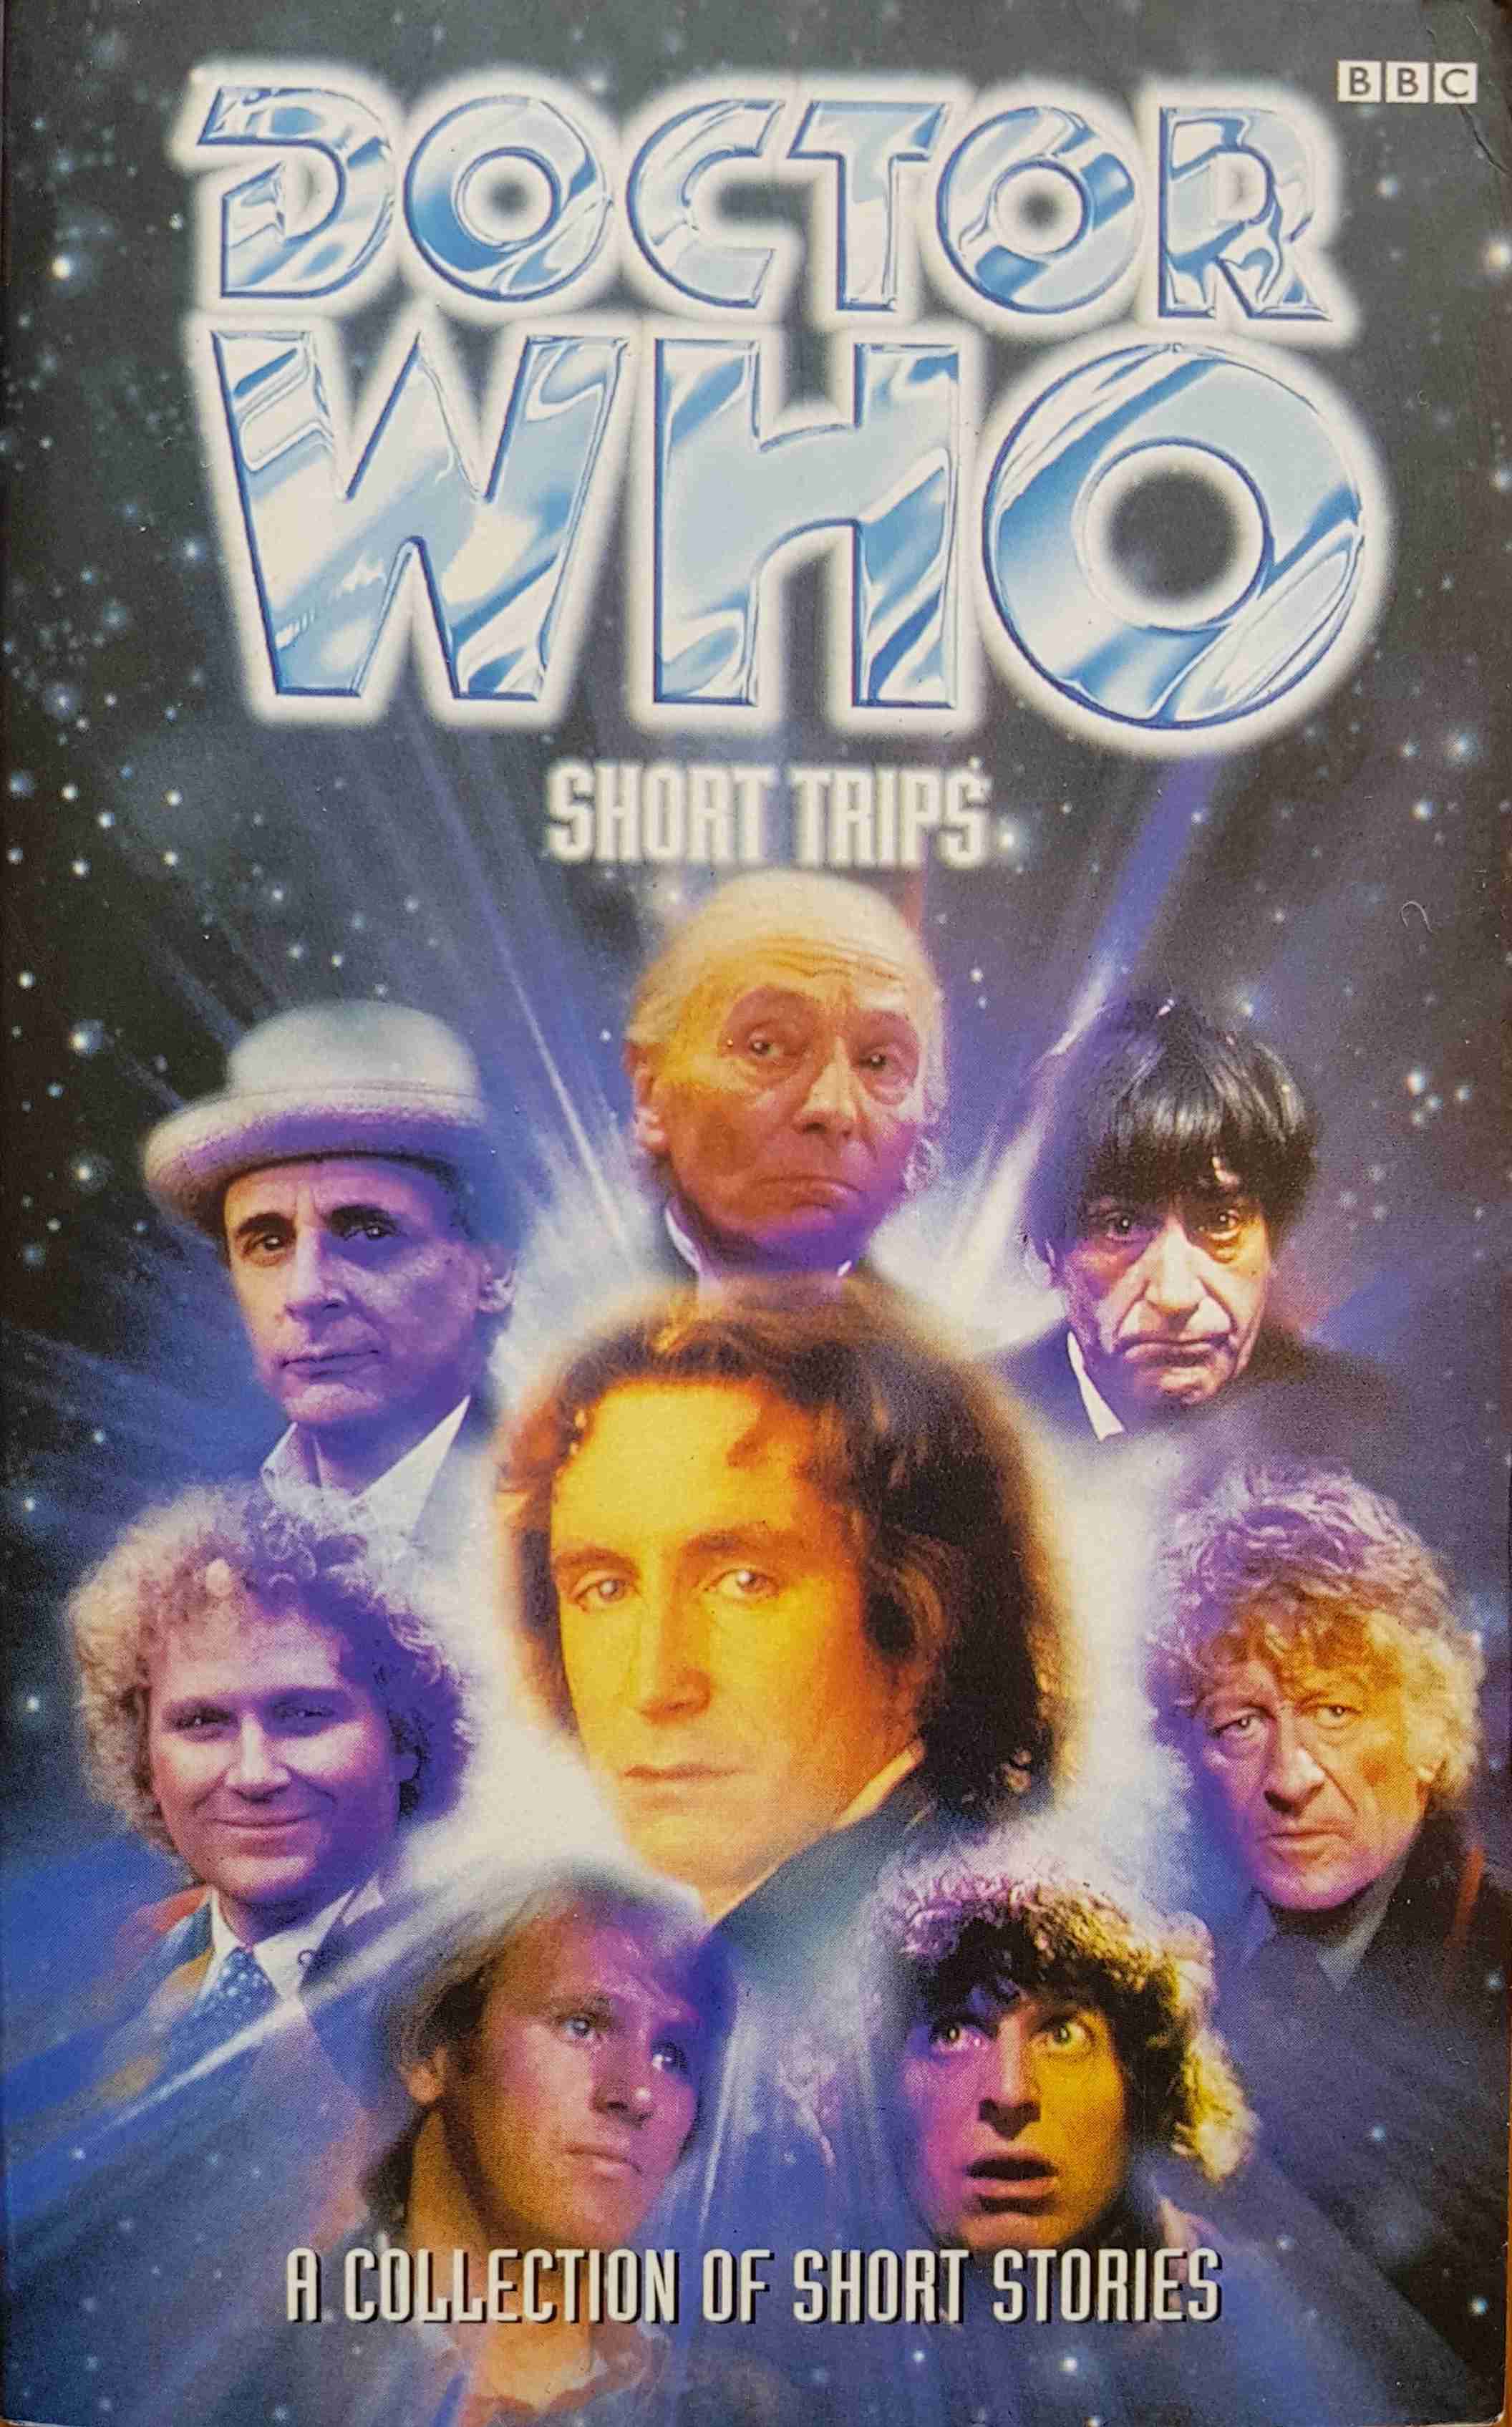 Picture of 0-563-40560-0 Doctor Who - Short trips by artist Various from the BBC records and Tapes library